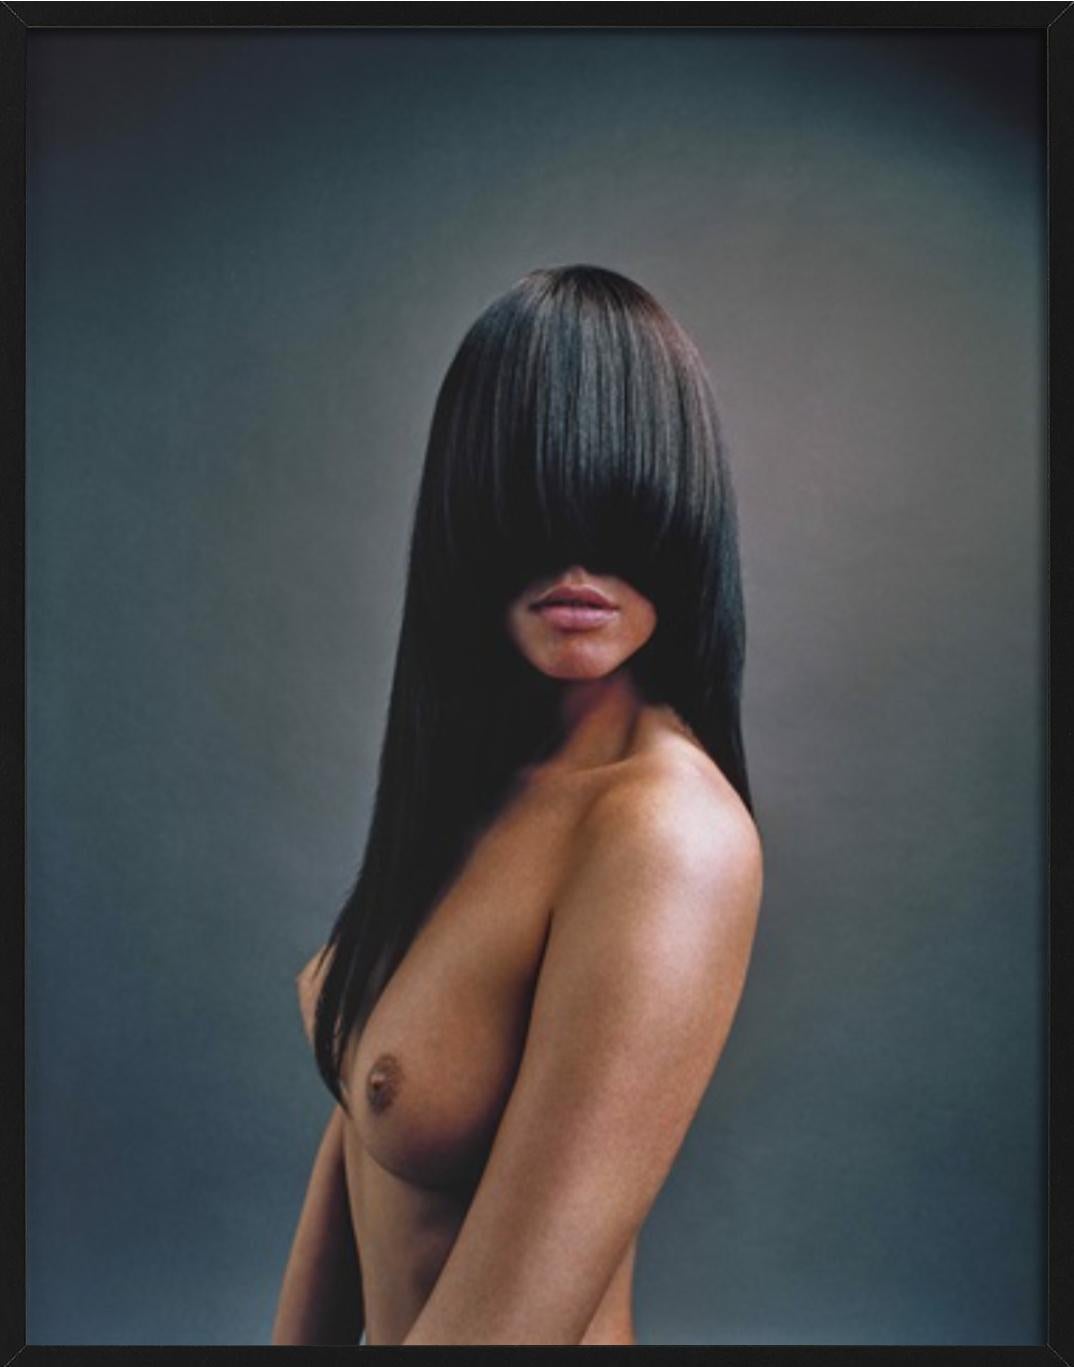 Irina, Vienna - nude portrait with long black hair, fine art photography, 2005 - Black Nude Photograph by Andreas H. Bitesnich